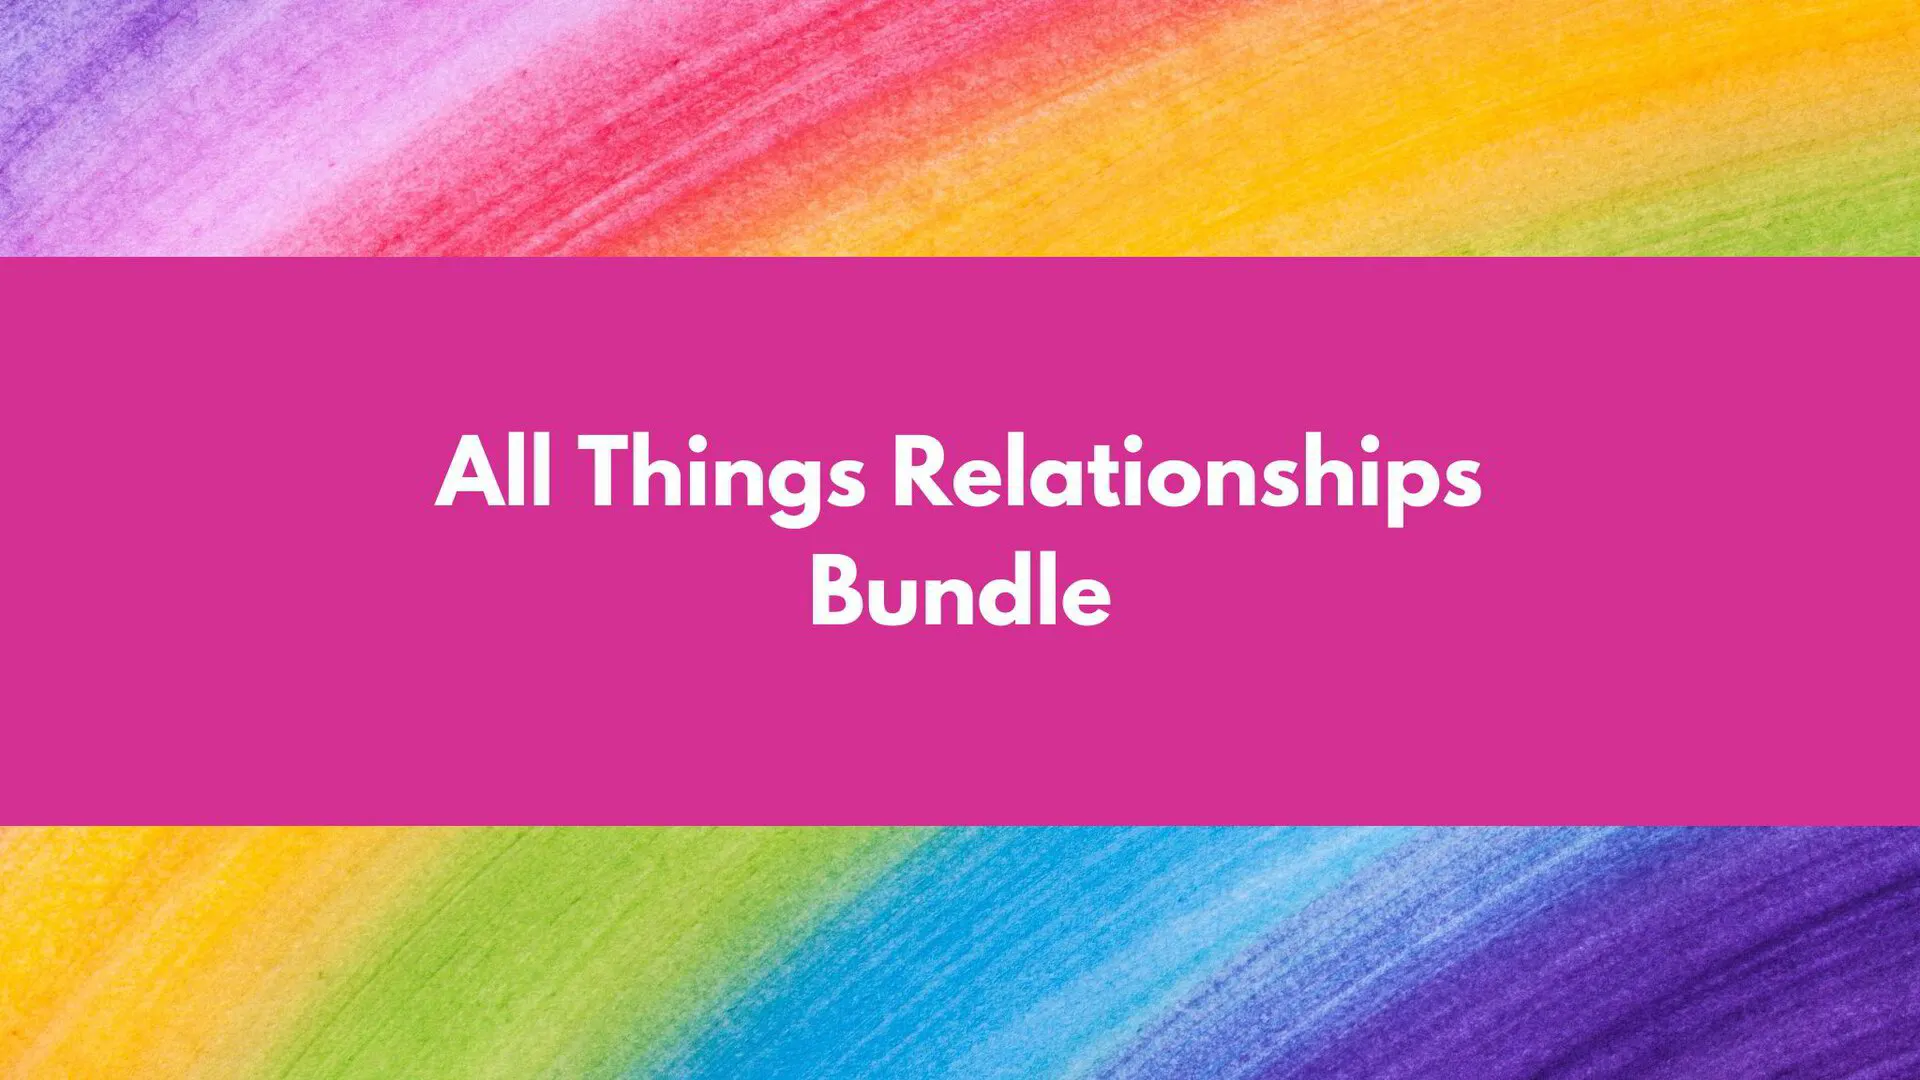 All Things Relationships Bundle